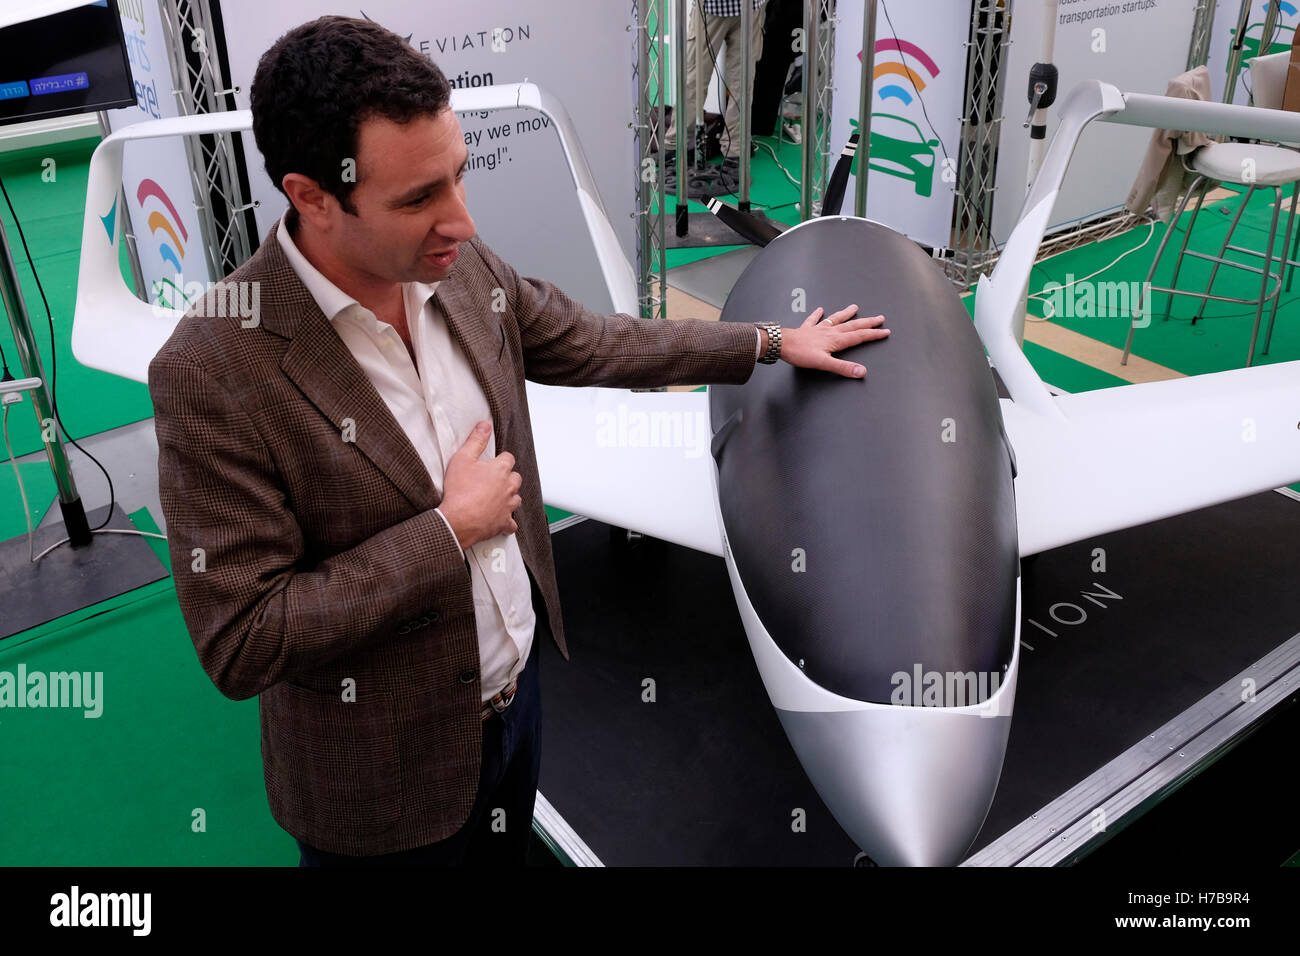 Representative of Eviation start up company display a prototype of an electric plane under development during the Fuel Choices Summit taking place in Tel Aviv on 03 November 2016. Currently there are more than 500 Israeli startups working on smart mobility and alternative fuels solutions and more than 200 research groups in universities across the country, which aspire to promote Israel's ambitious goal of reducing the country's oil consumption by 60% by 2025. Stock Photo